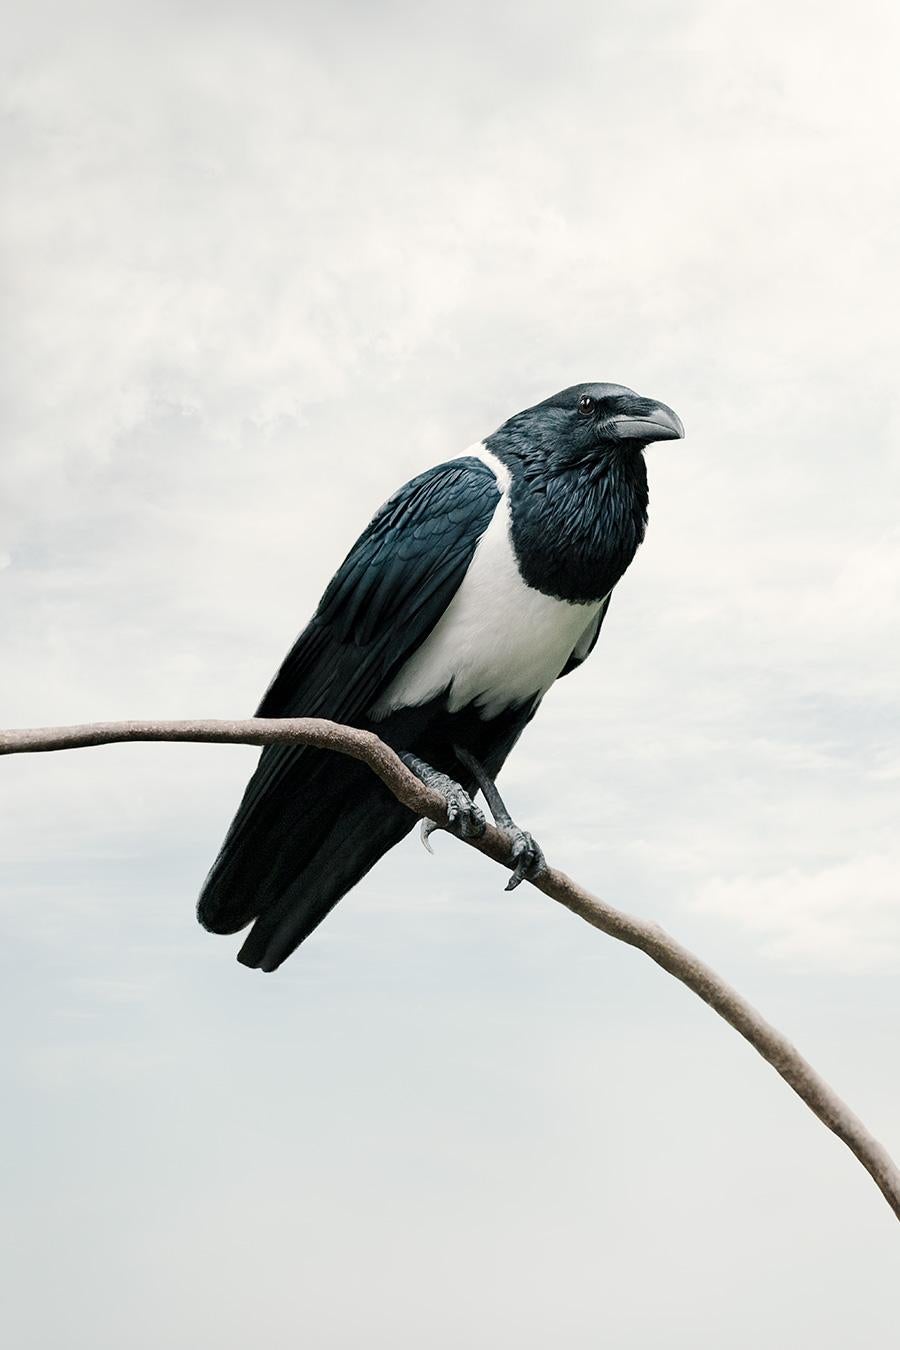 Present Pied Crow
Series: Meditations
Photo-based painting on Canson Infinity Rag Photographique

Available sizes
30 x 20 in     Edition of 15
40 x 27 in     Edition of 12
60 x 40 in     Edition of 10

In this series, Zilberberg creates animal